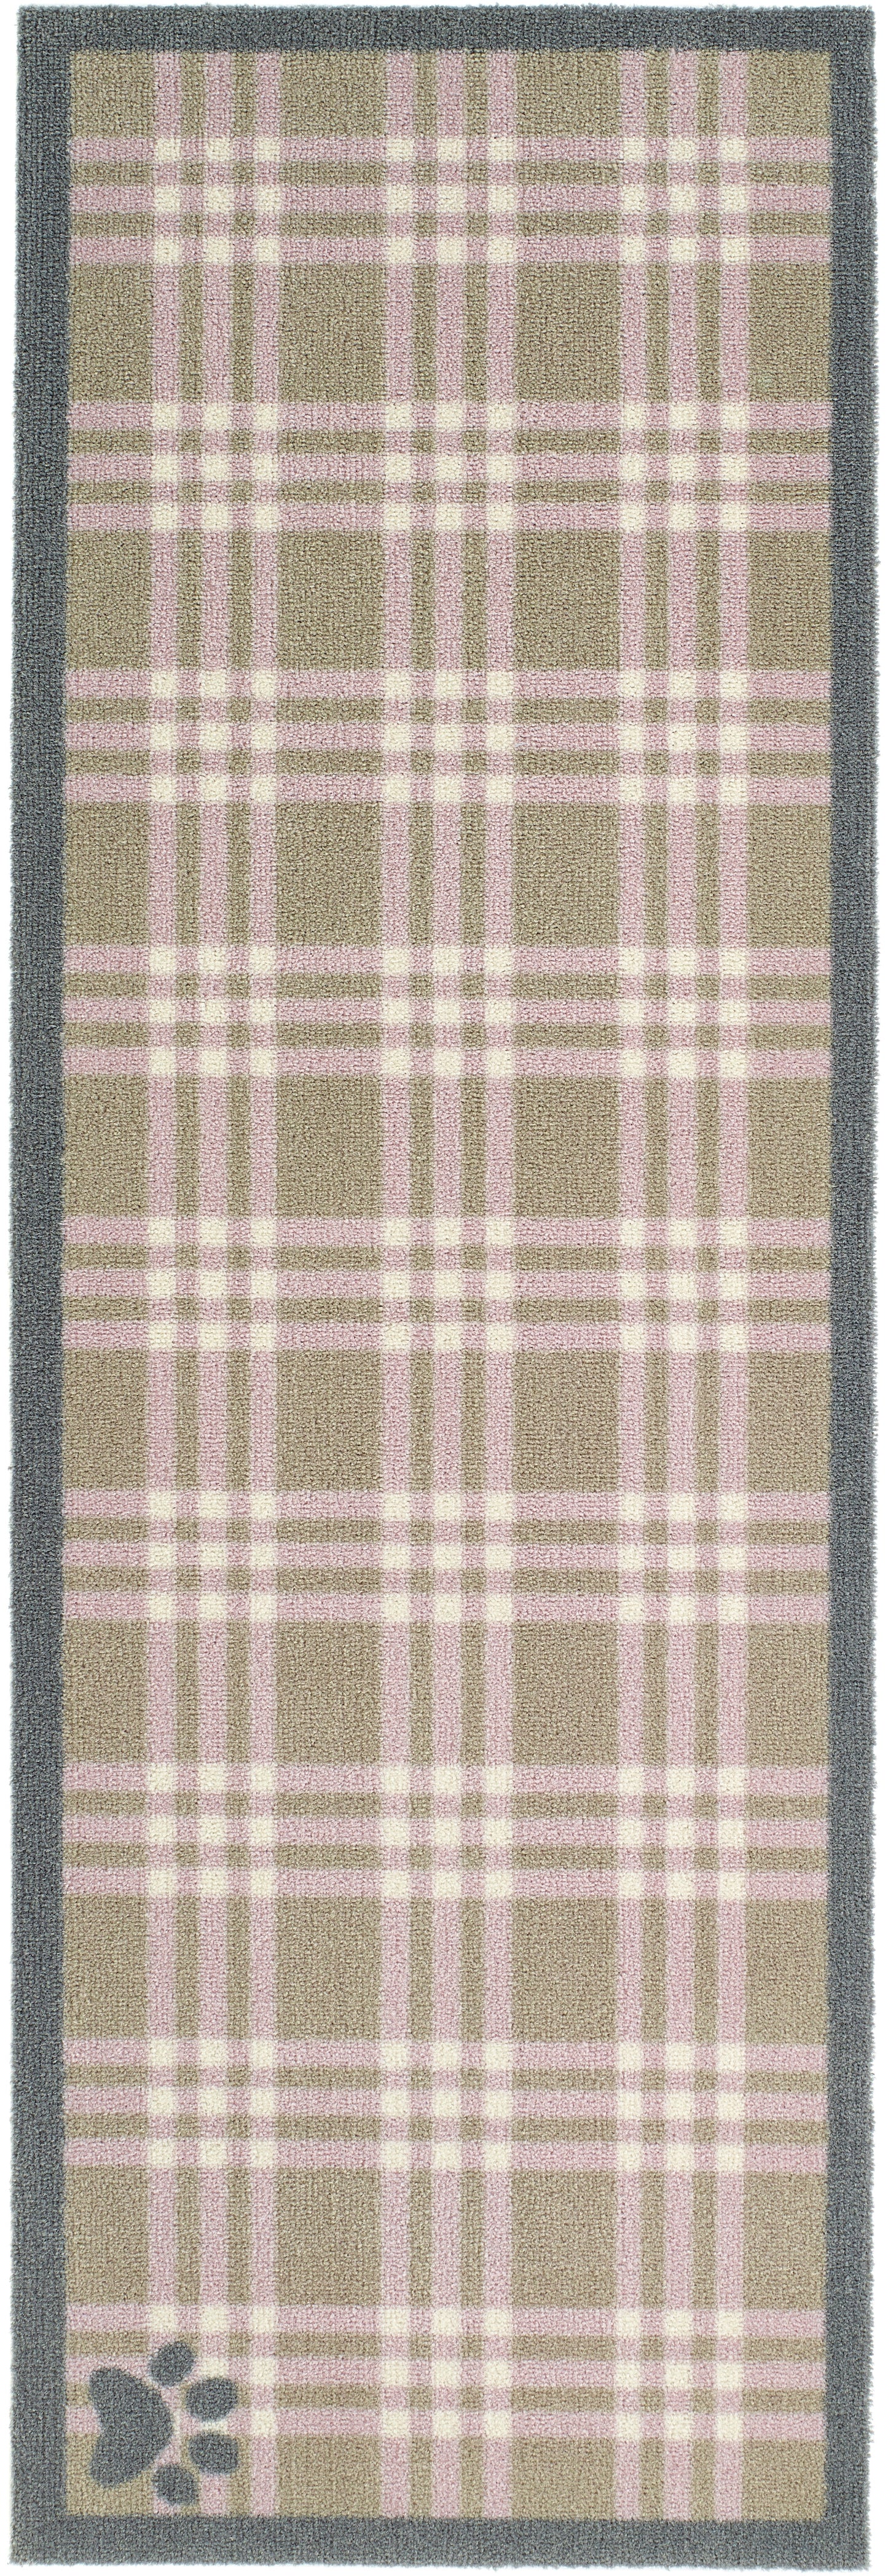 Country Check Pink Runner